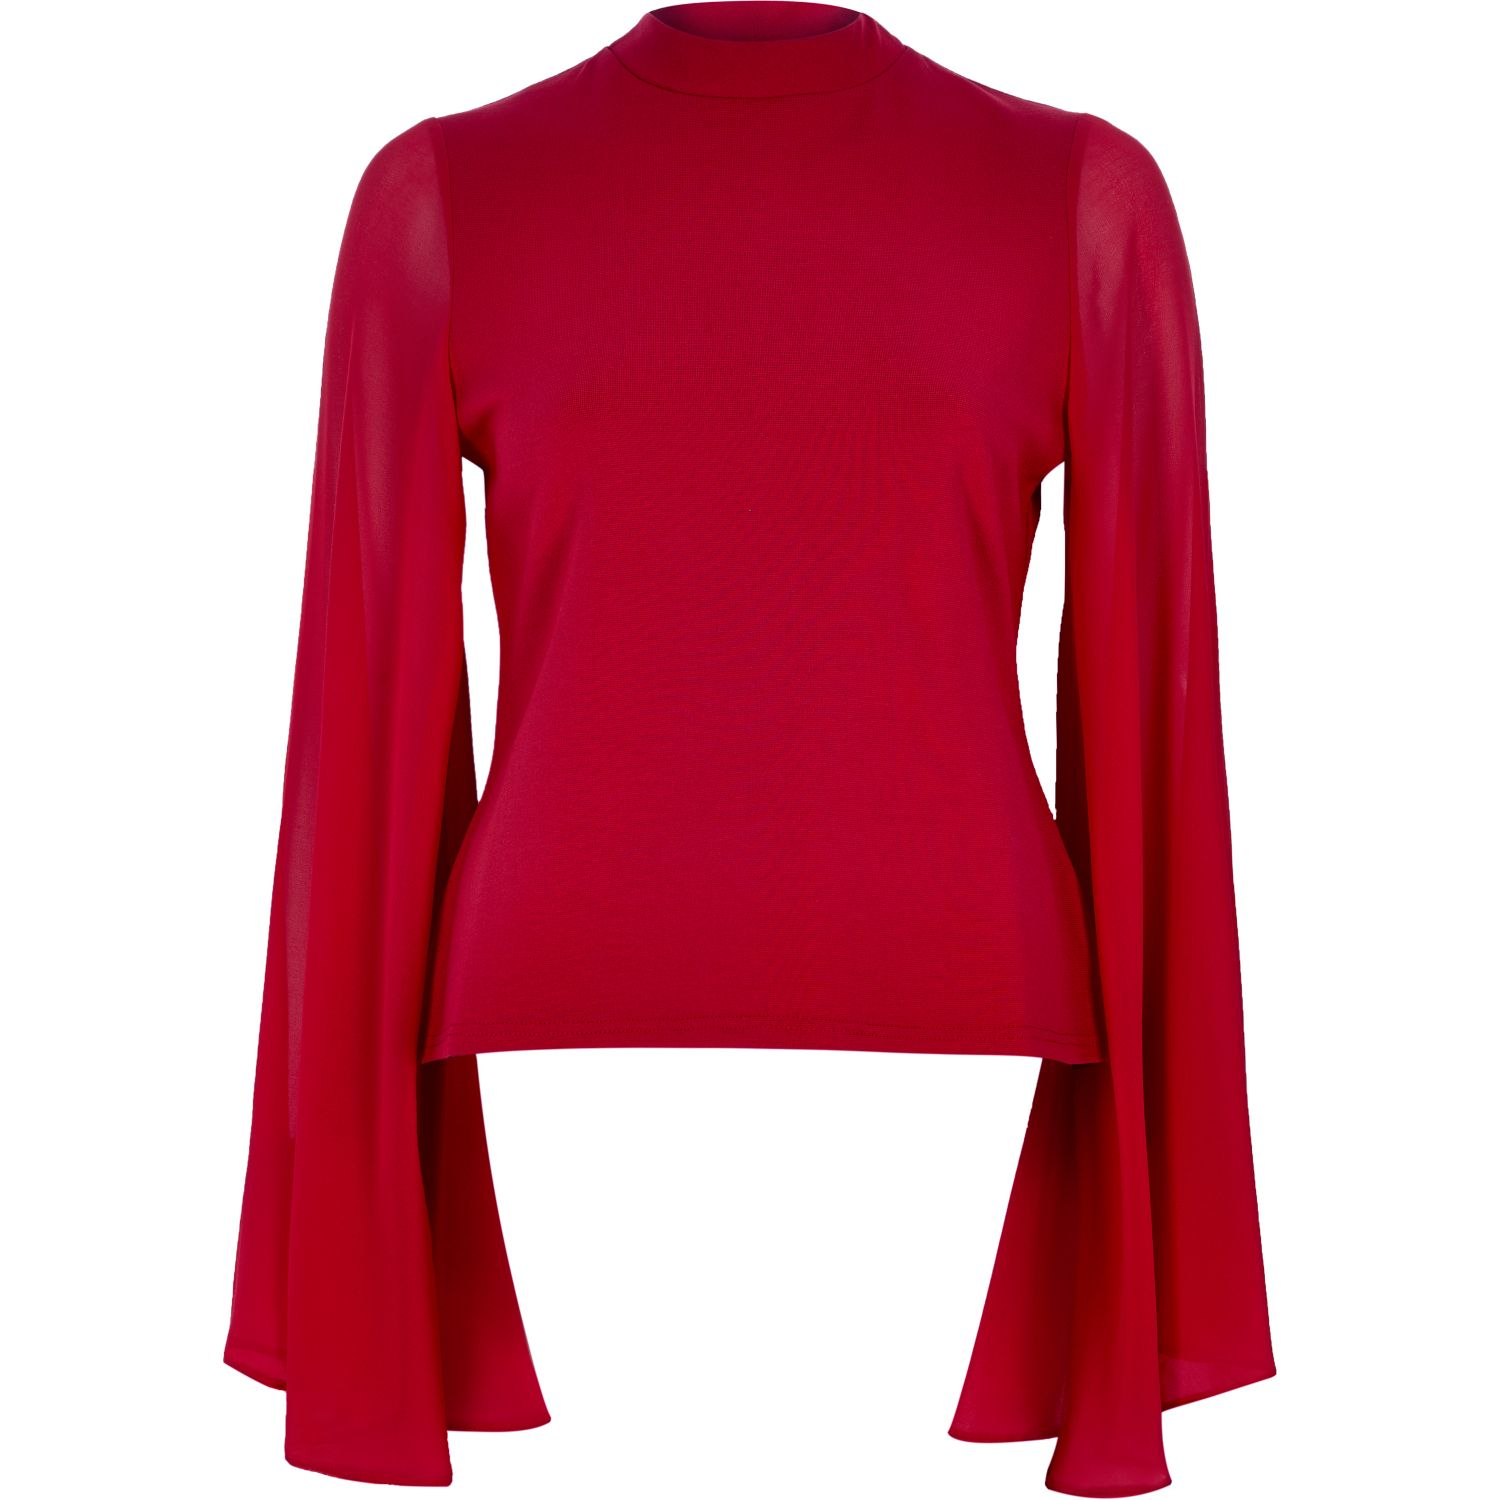 Lyst - River Island Red Flared Sleeve Cut-out Back Top in Red